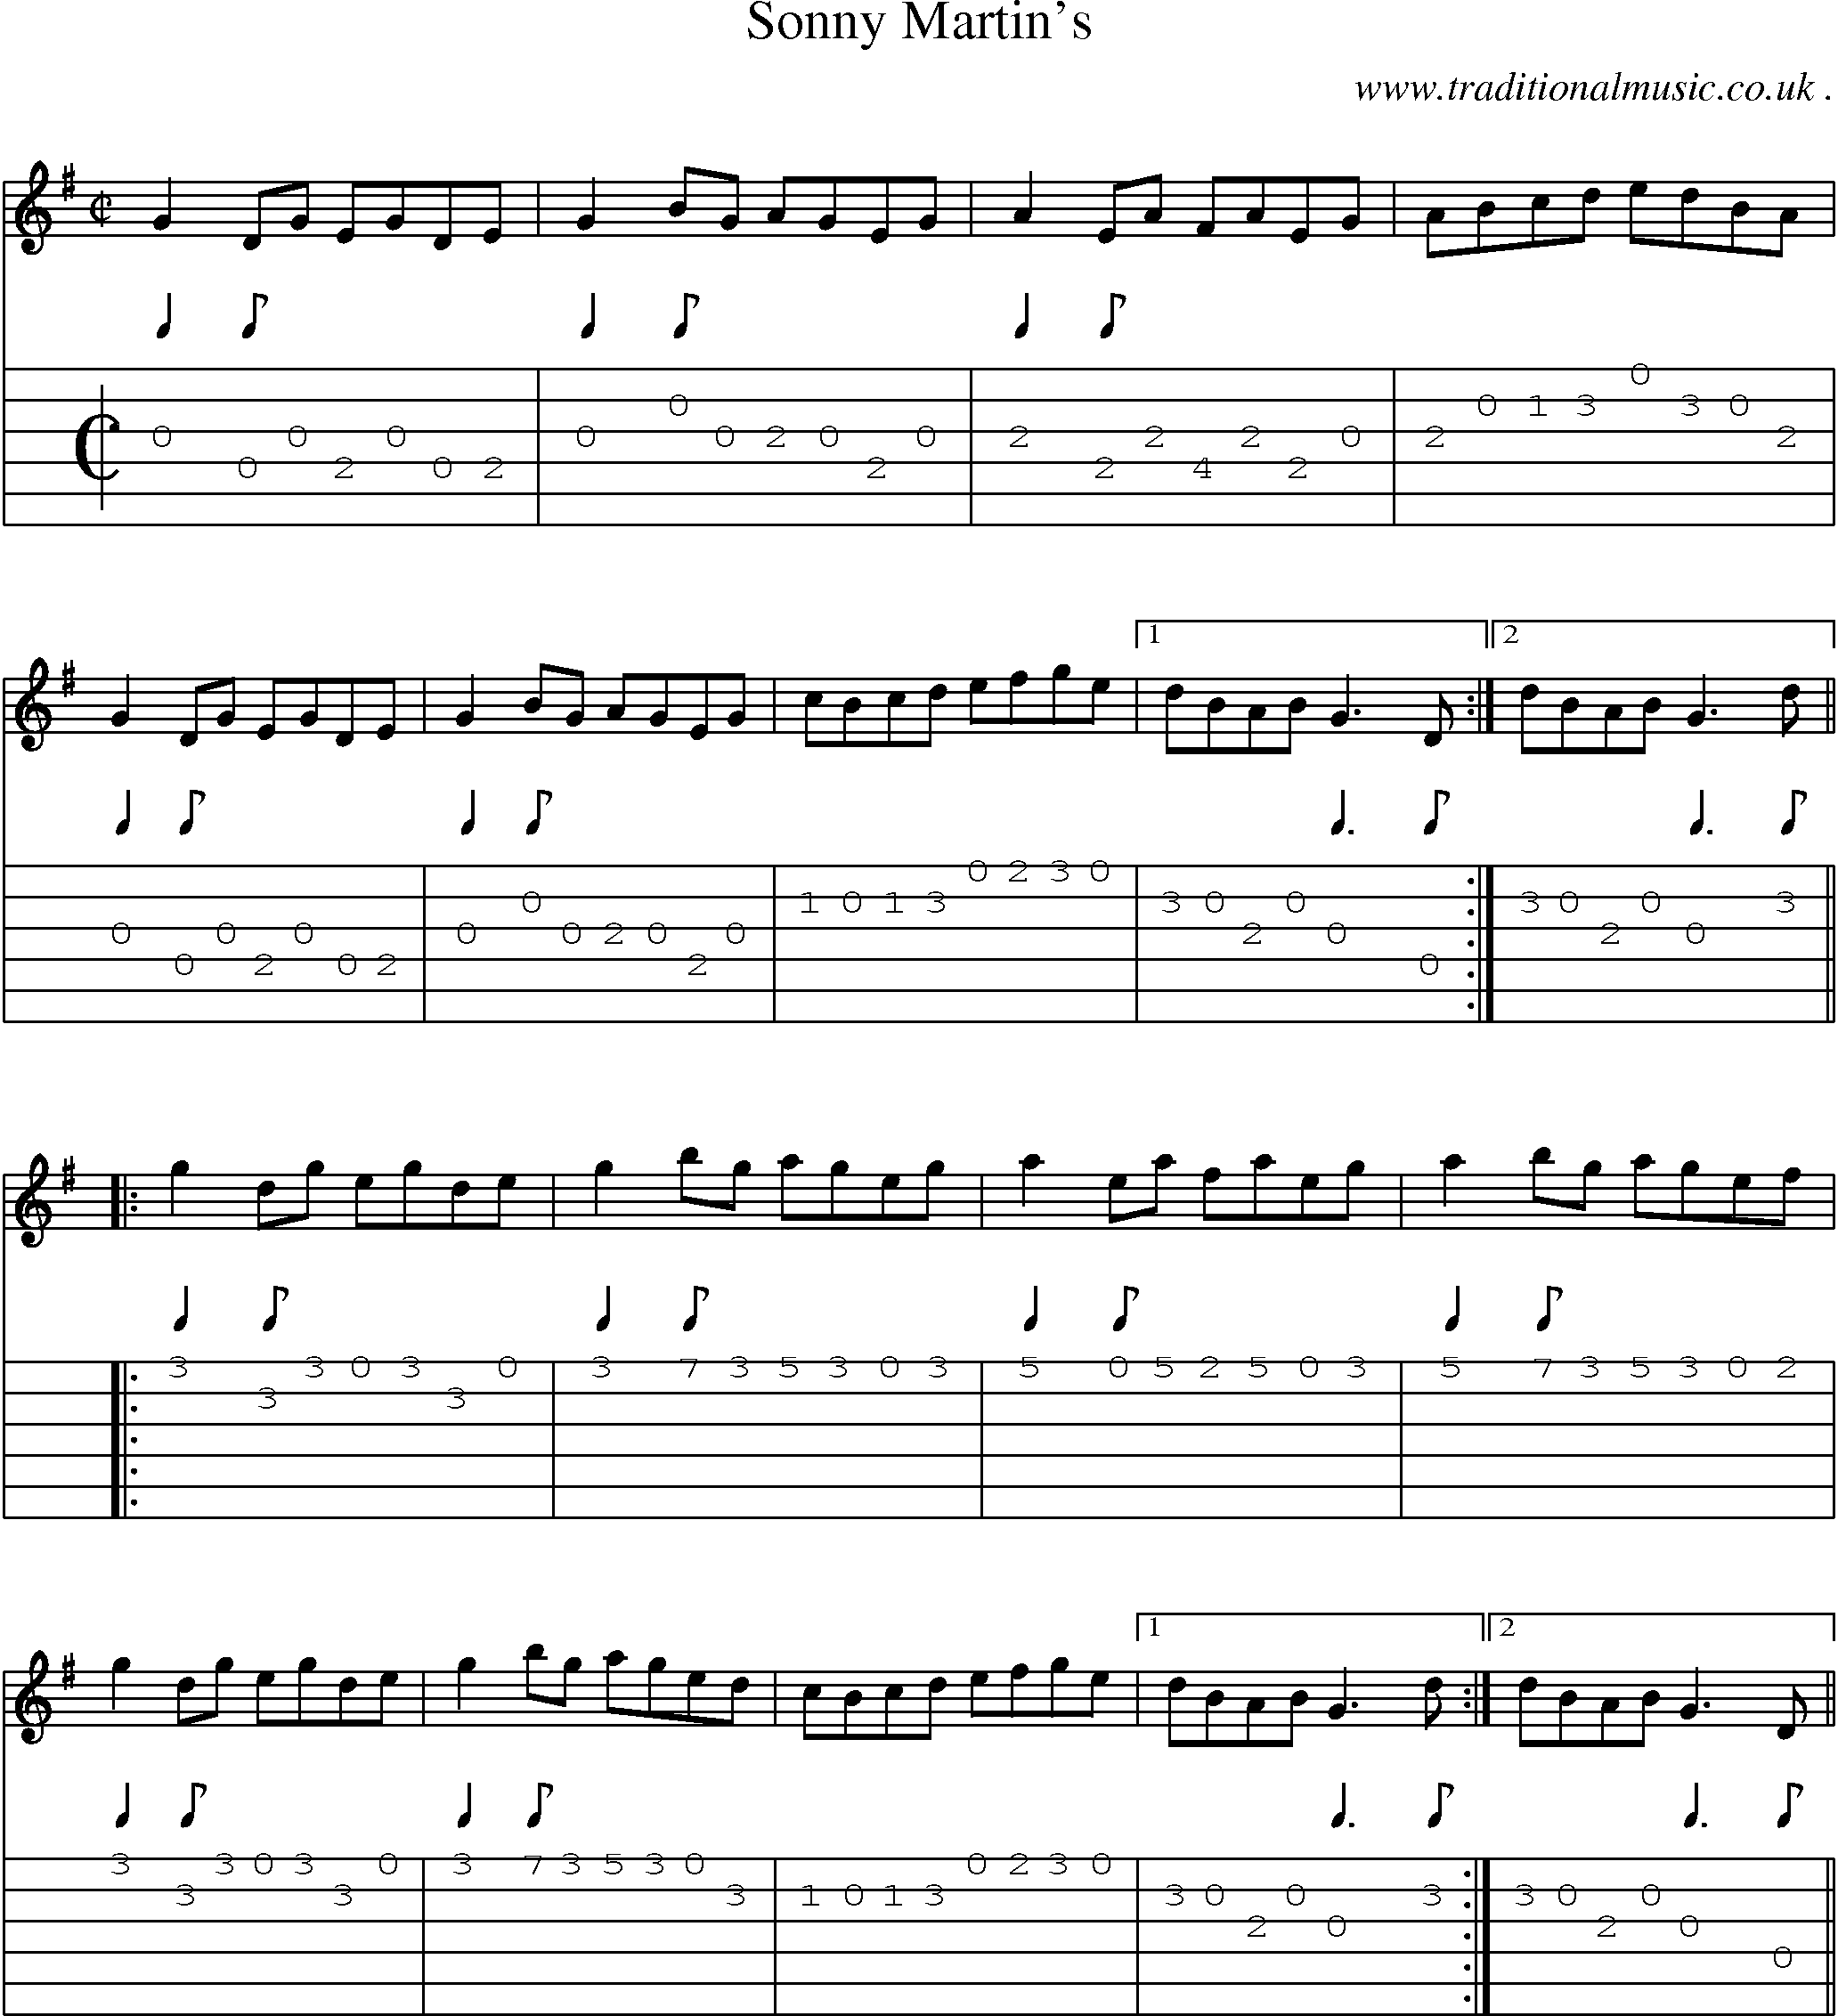 Sheet-Music and Guitar Tabs for Sonny Martins